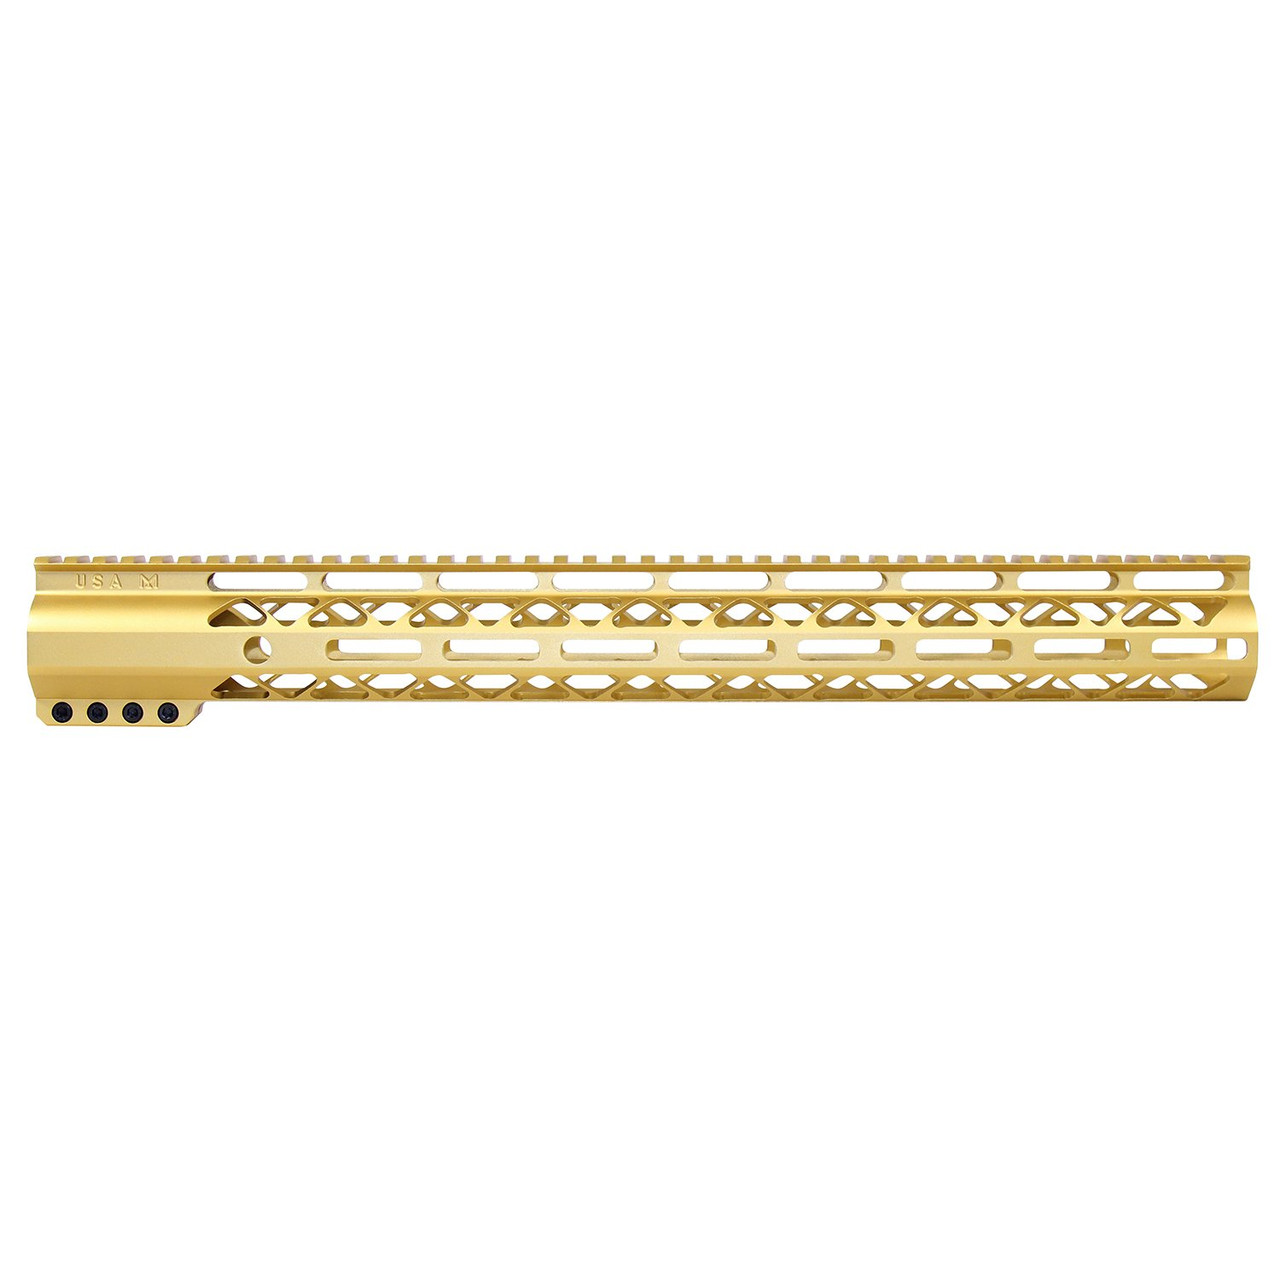 Guntec USA GT-16.5ALC-GOLD 16.5" AIR-LOK Series M-LOK Compression Free Floating Handguard With Monolithic Top Rail (Anodized Gold)